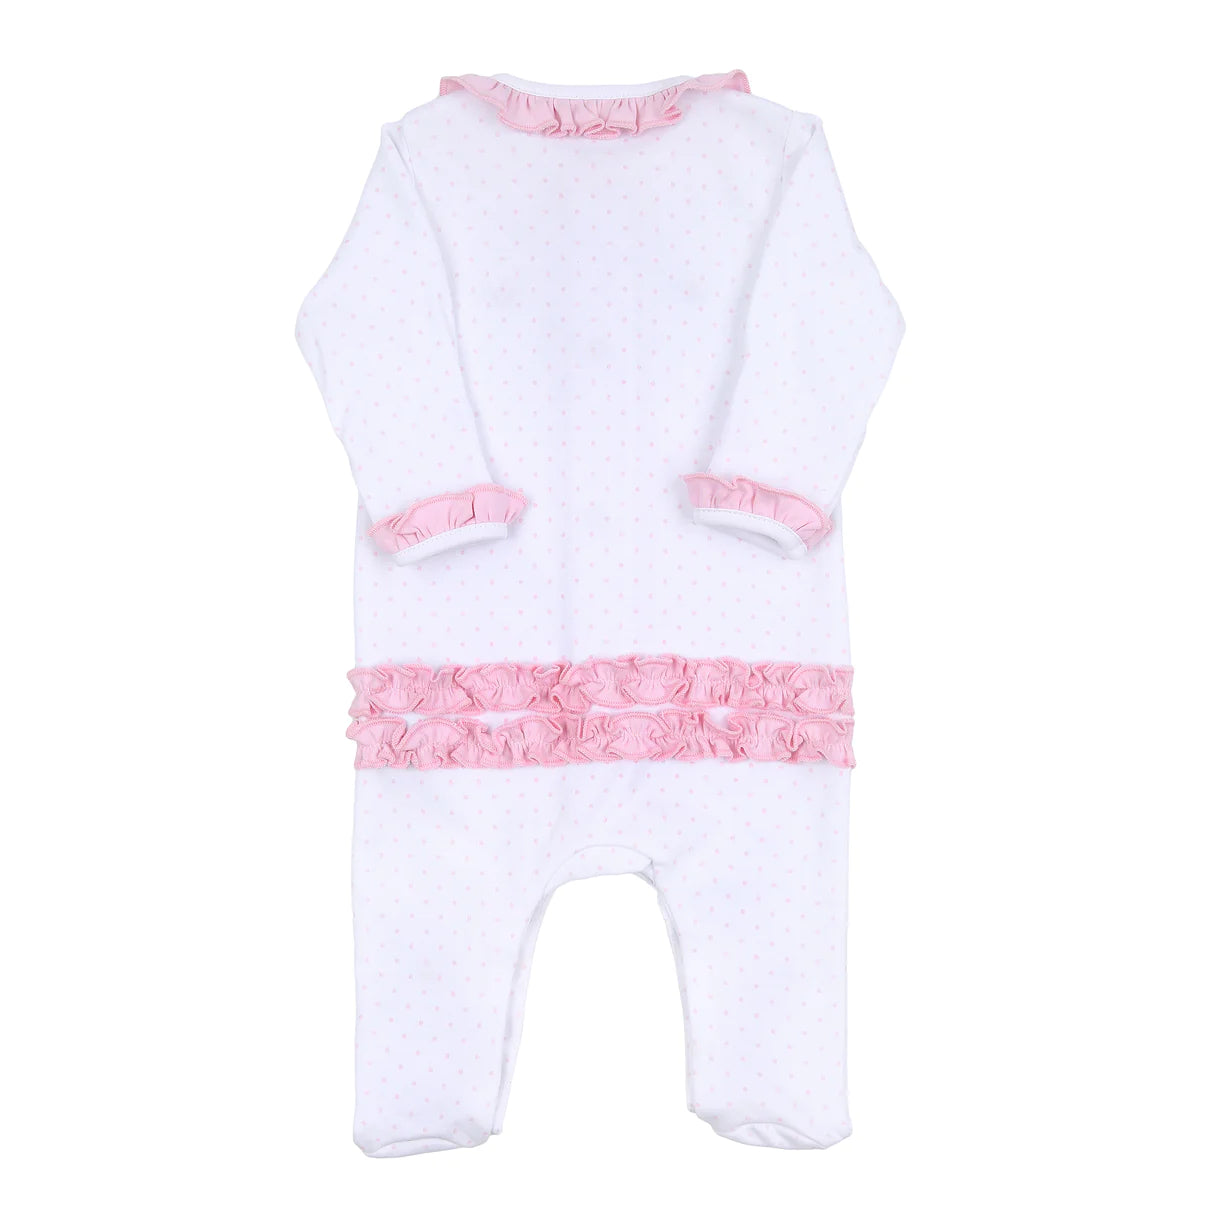 Annalise's Classics Scattered Ruffle Footie